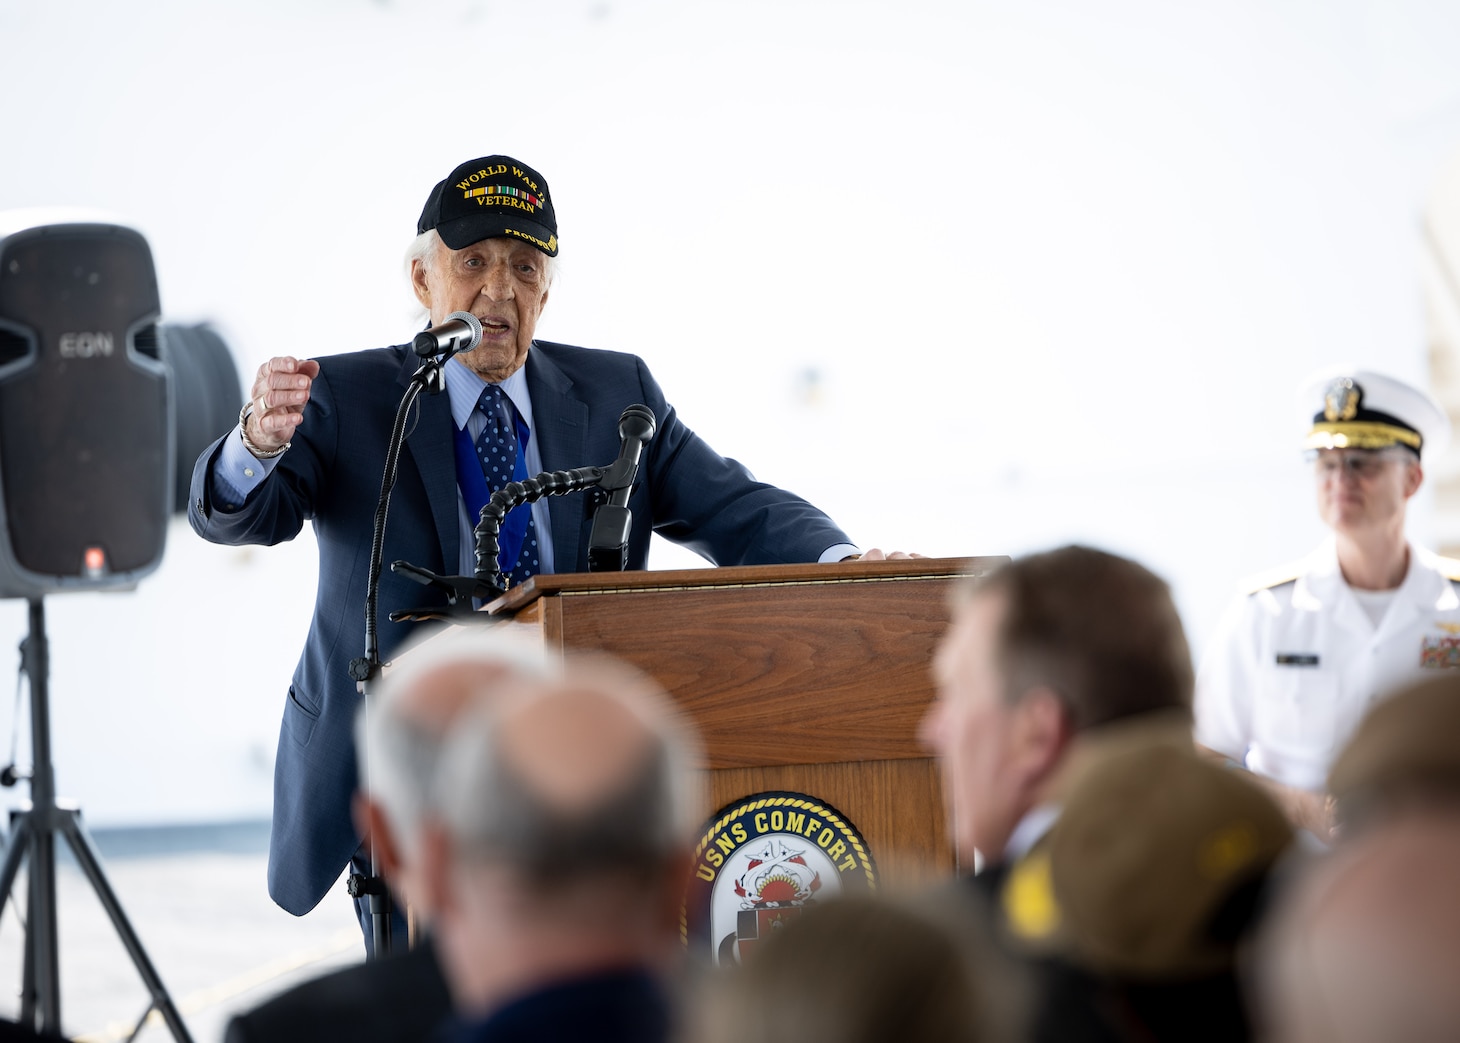 Dave Yoho, U.S. Merchant Marine and World War II Veteran, delivers remarks during Military Sealift Command’s National Maritime Day ceremony aboard USNS Comfort (T-AH 20) May 22, 2023. National Maritime Day honors the thousands of dedicated merchant mariners who served aboard United States vessels around the world.